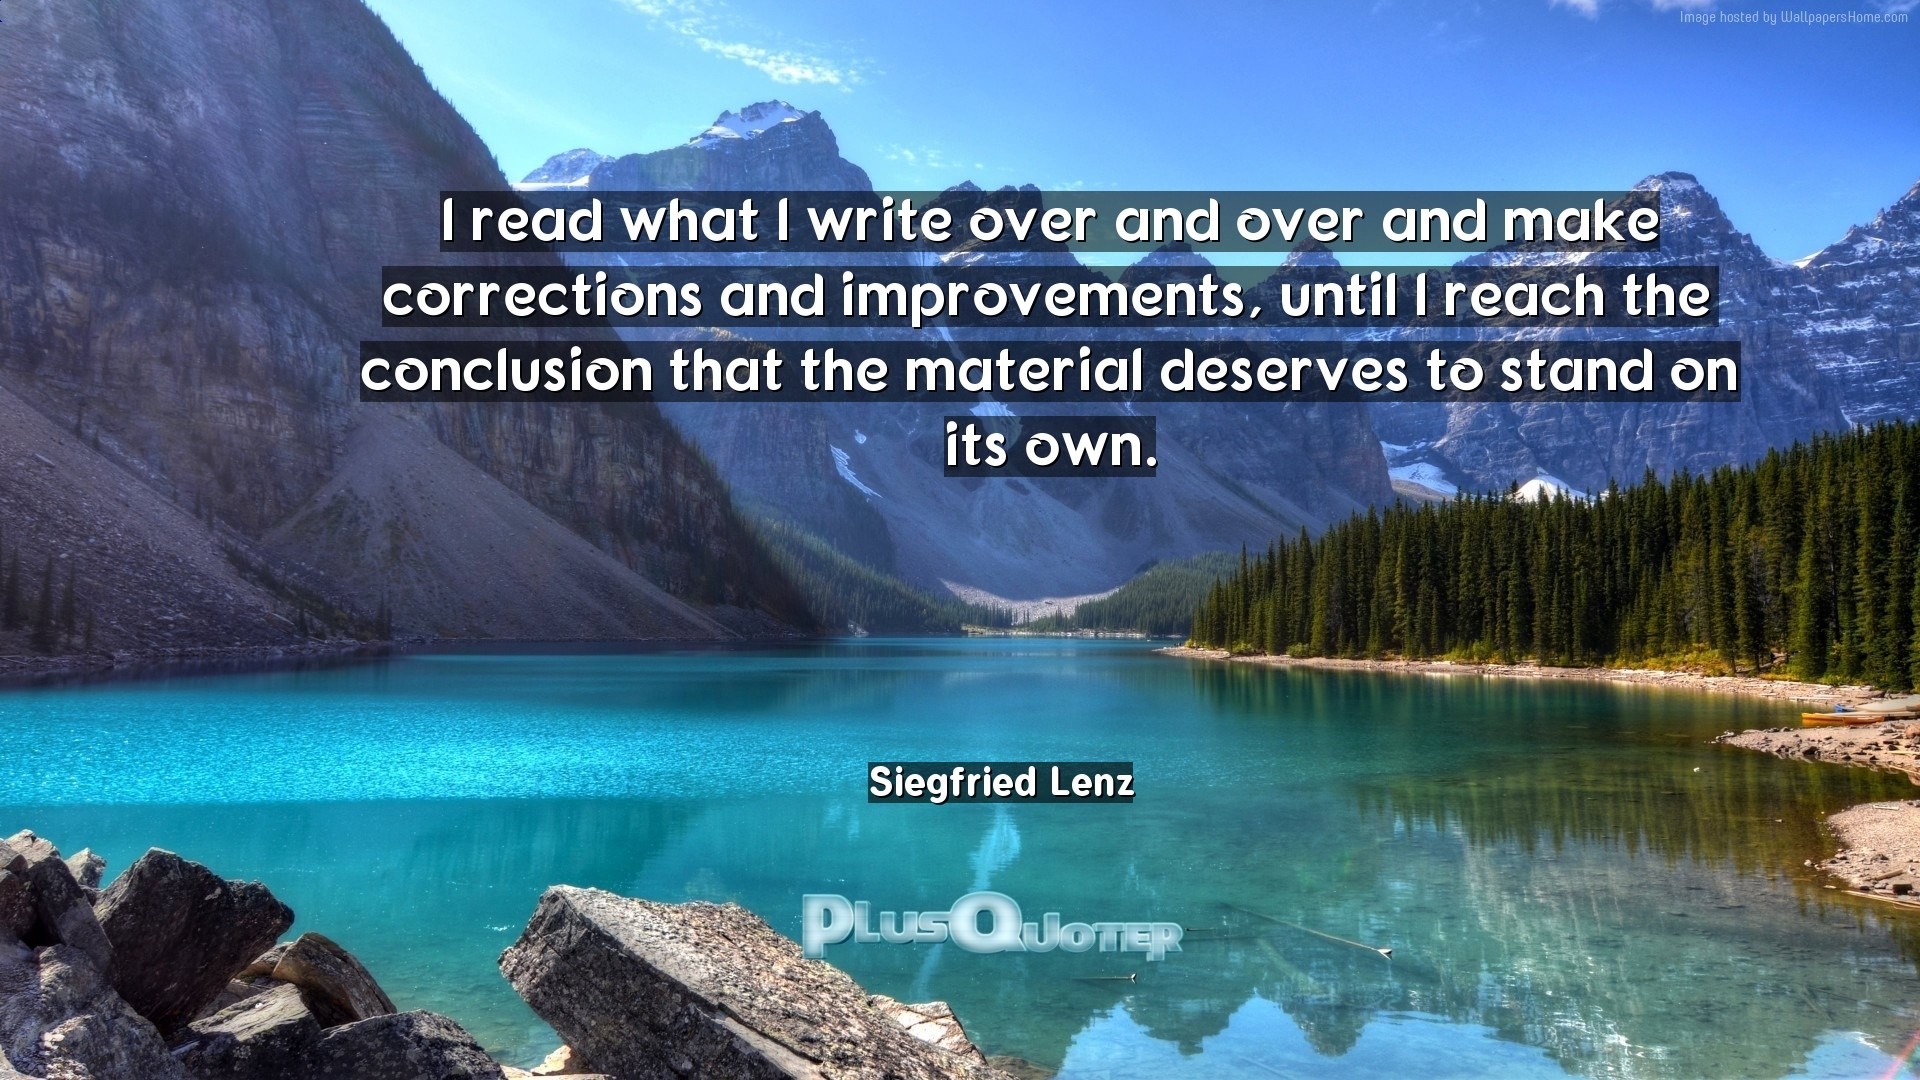 1920x1080 Download Wallpaper with inspirational Quotes- "I read what I write over and  over and